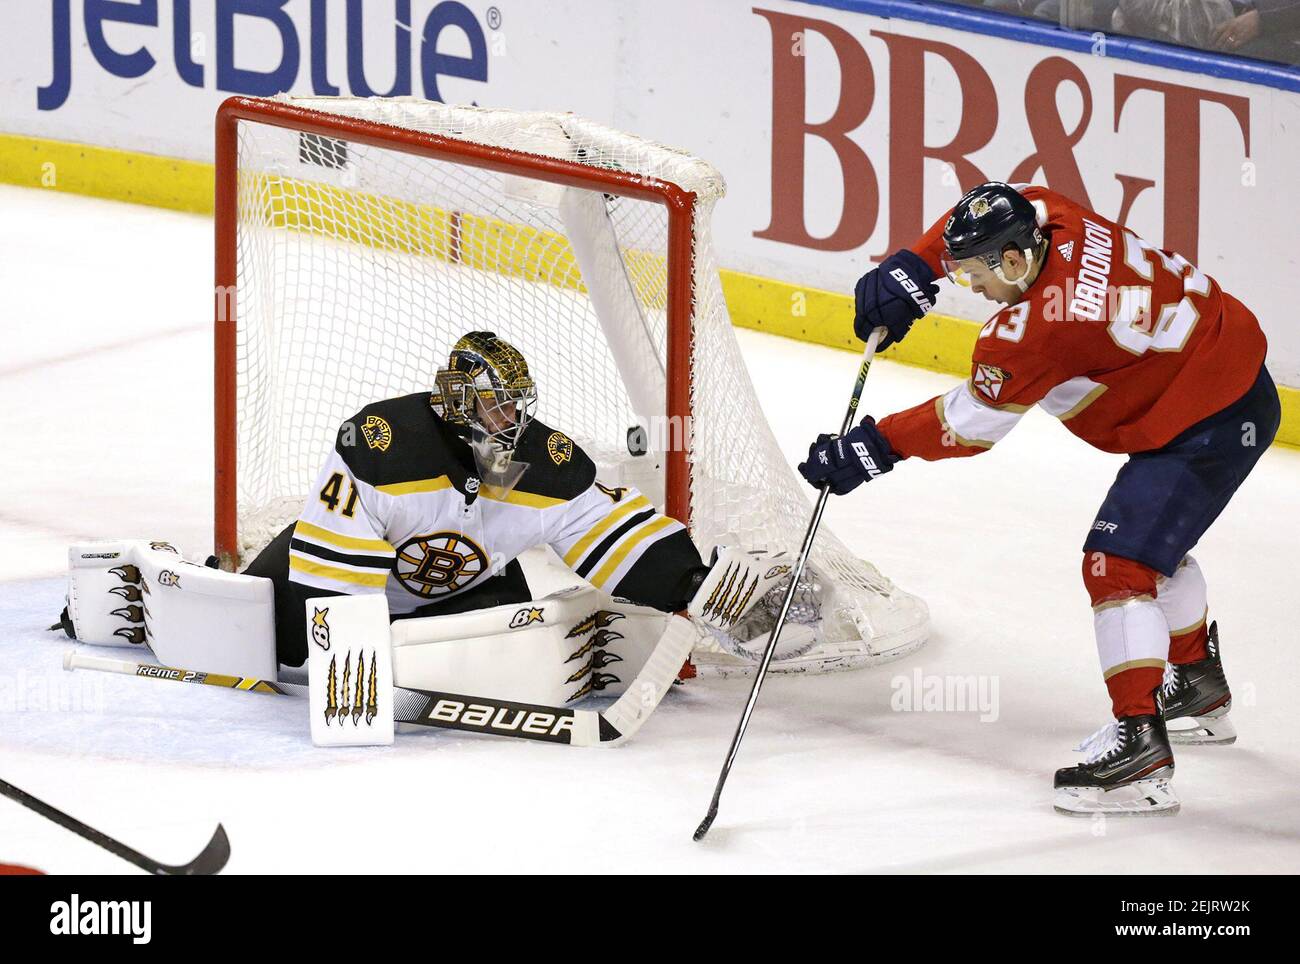 Boston Bruins goalie Jaroslav Halak (41) makes a save against the Florida Panthers' Evgenii Dadonov (63) during the second periodÂ at the BB&T Center in Sunrise, Fla., on Thursday, March 5, 2020. The Bruins won, 2-1, in overtime. (David Santiago/Miami Herald/TNS) Stock Photo